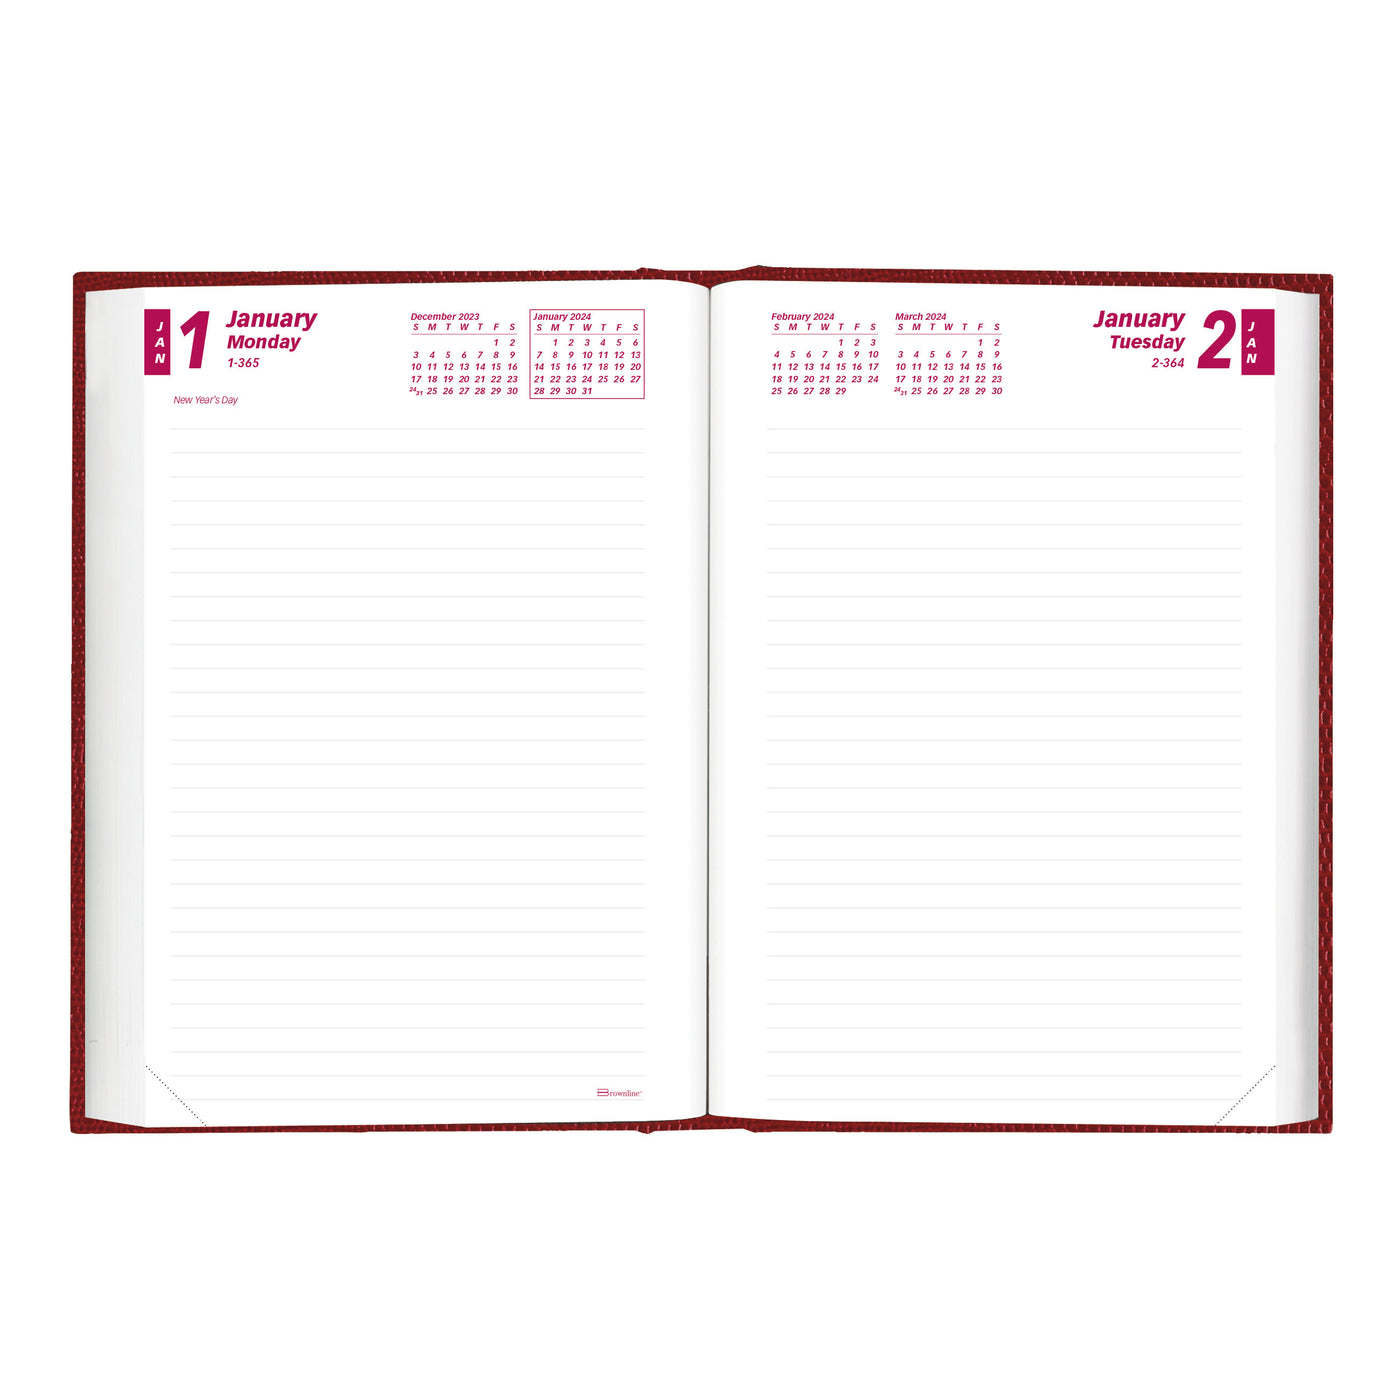 Brownline Daily Planner - 5" x 7 1/2" - Red Cover